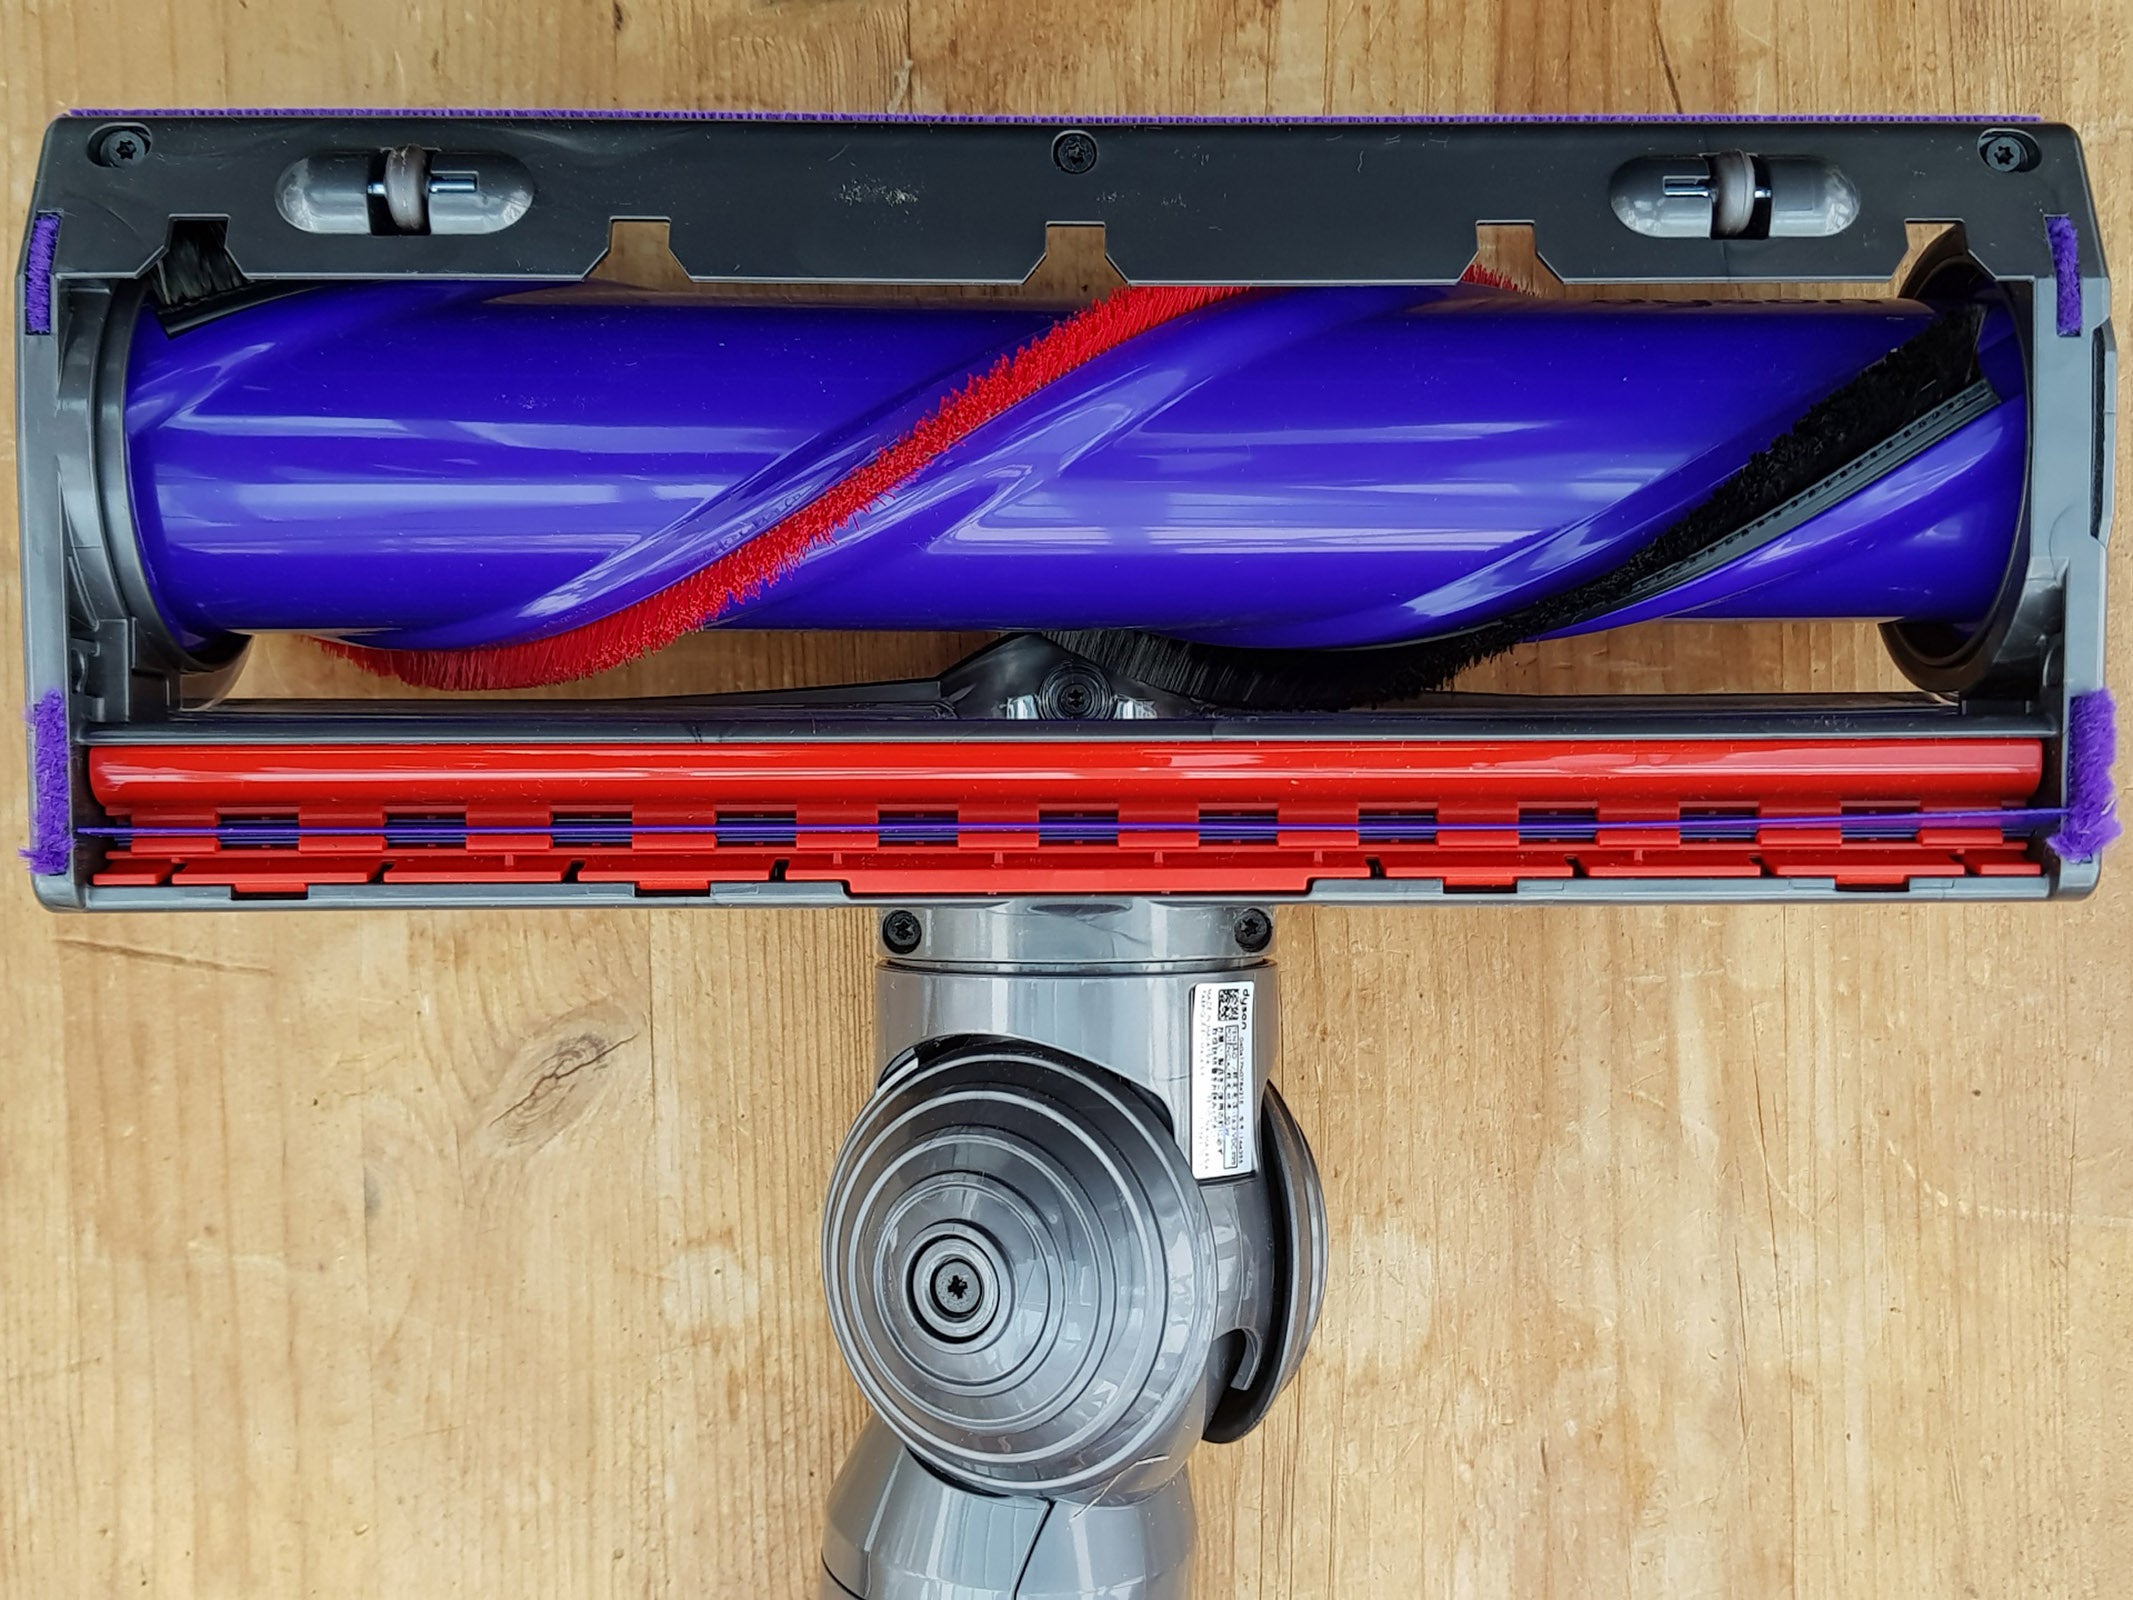 Dyson Cyclone V10 vacuum cleaner head on wooden floor.